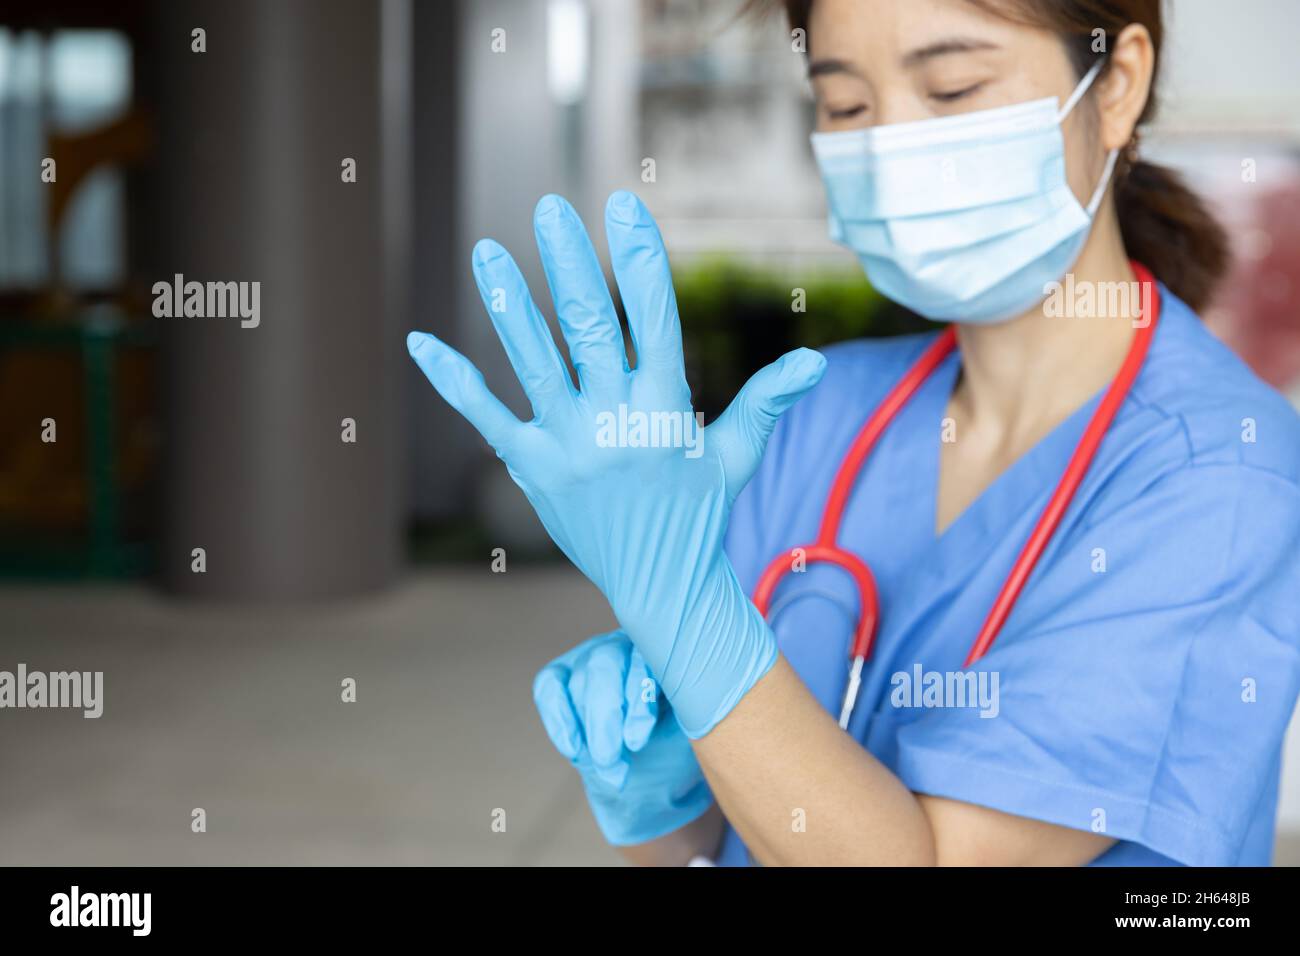 Medical staff wearing gloves to prepare for the outbreak of communicable diseases Corona Virus (COVID-19) Stock Photo